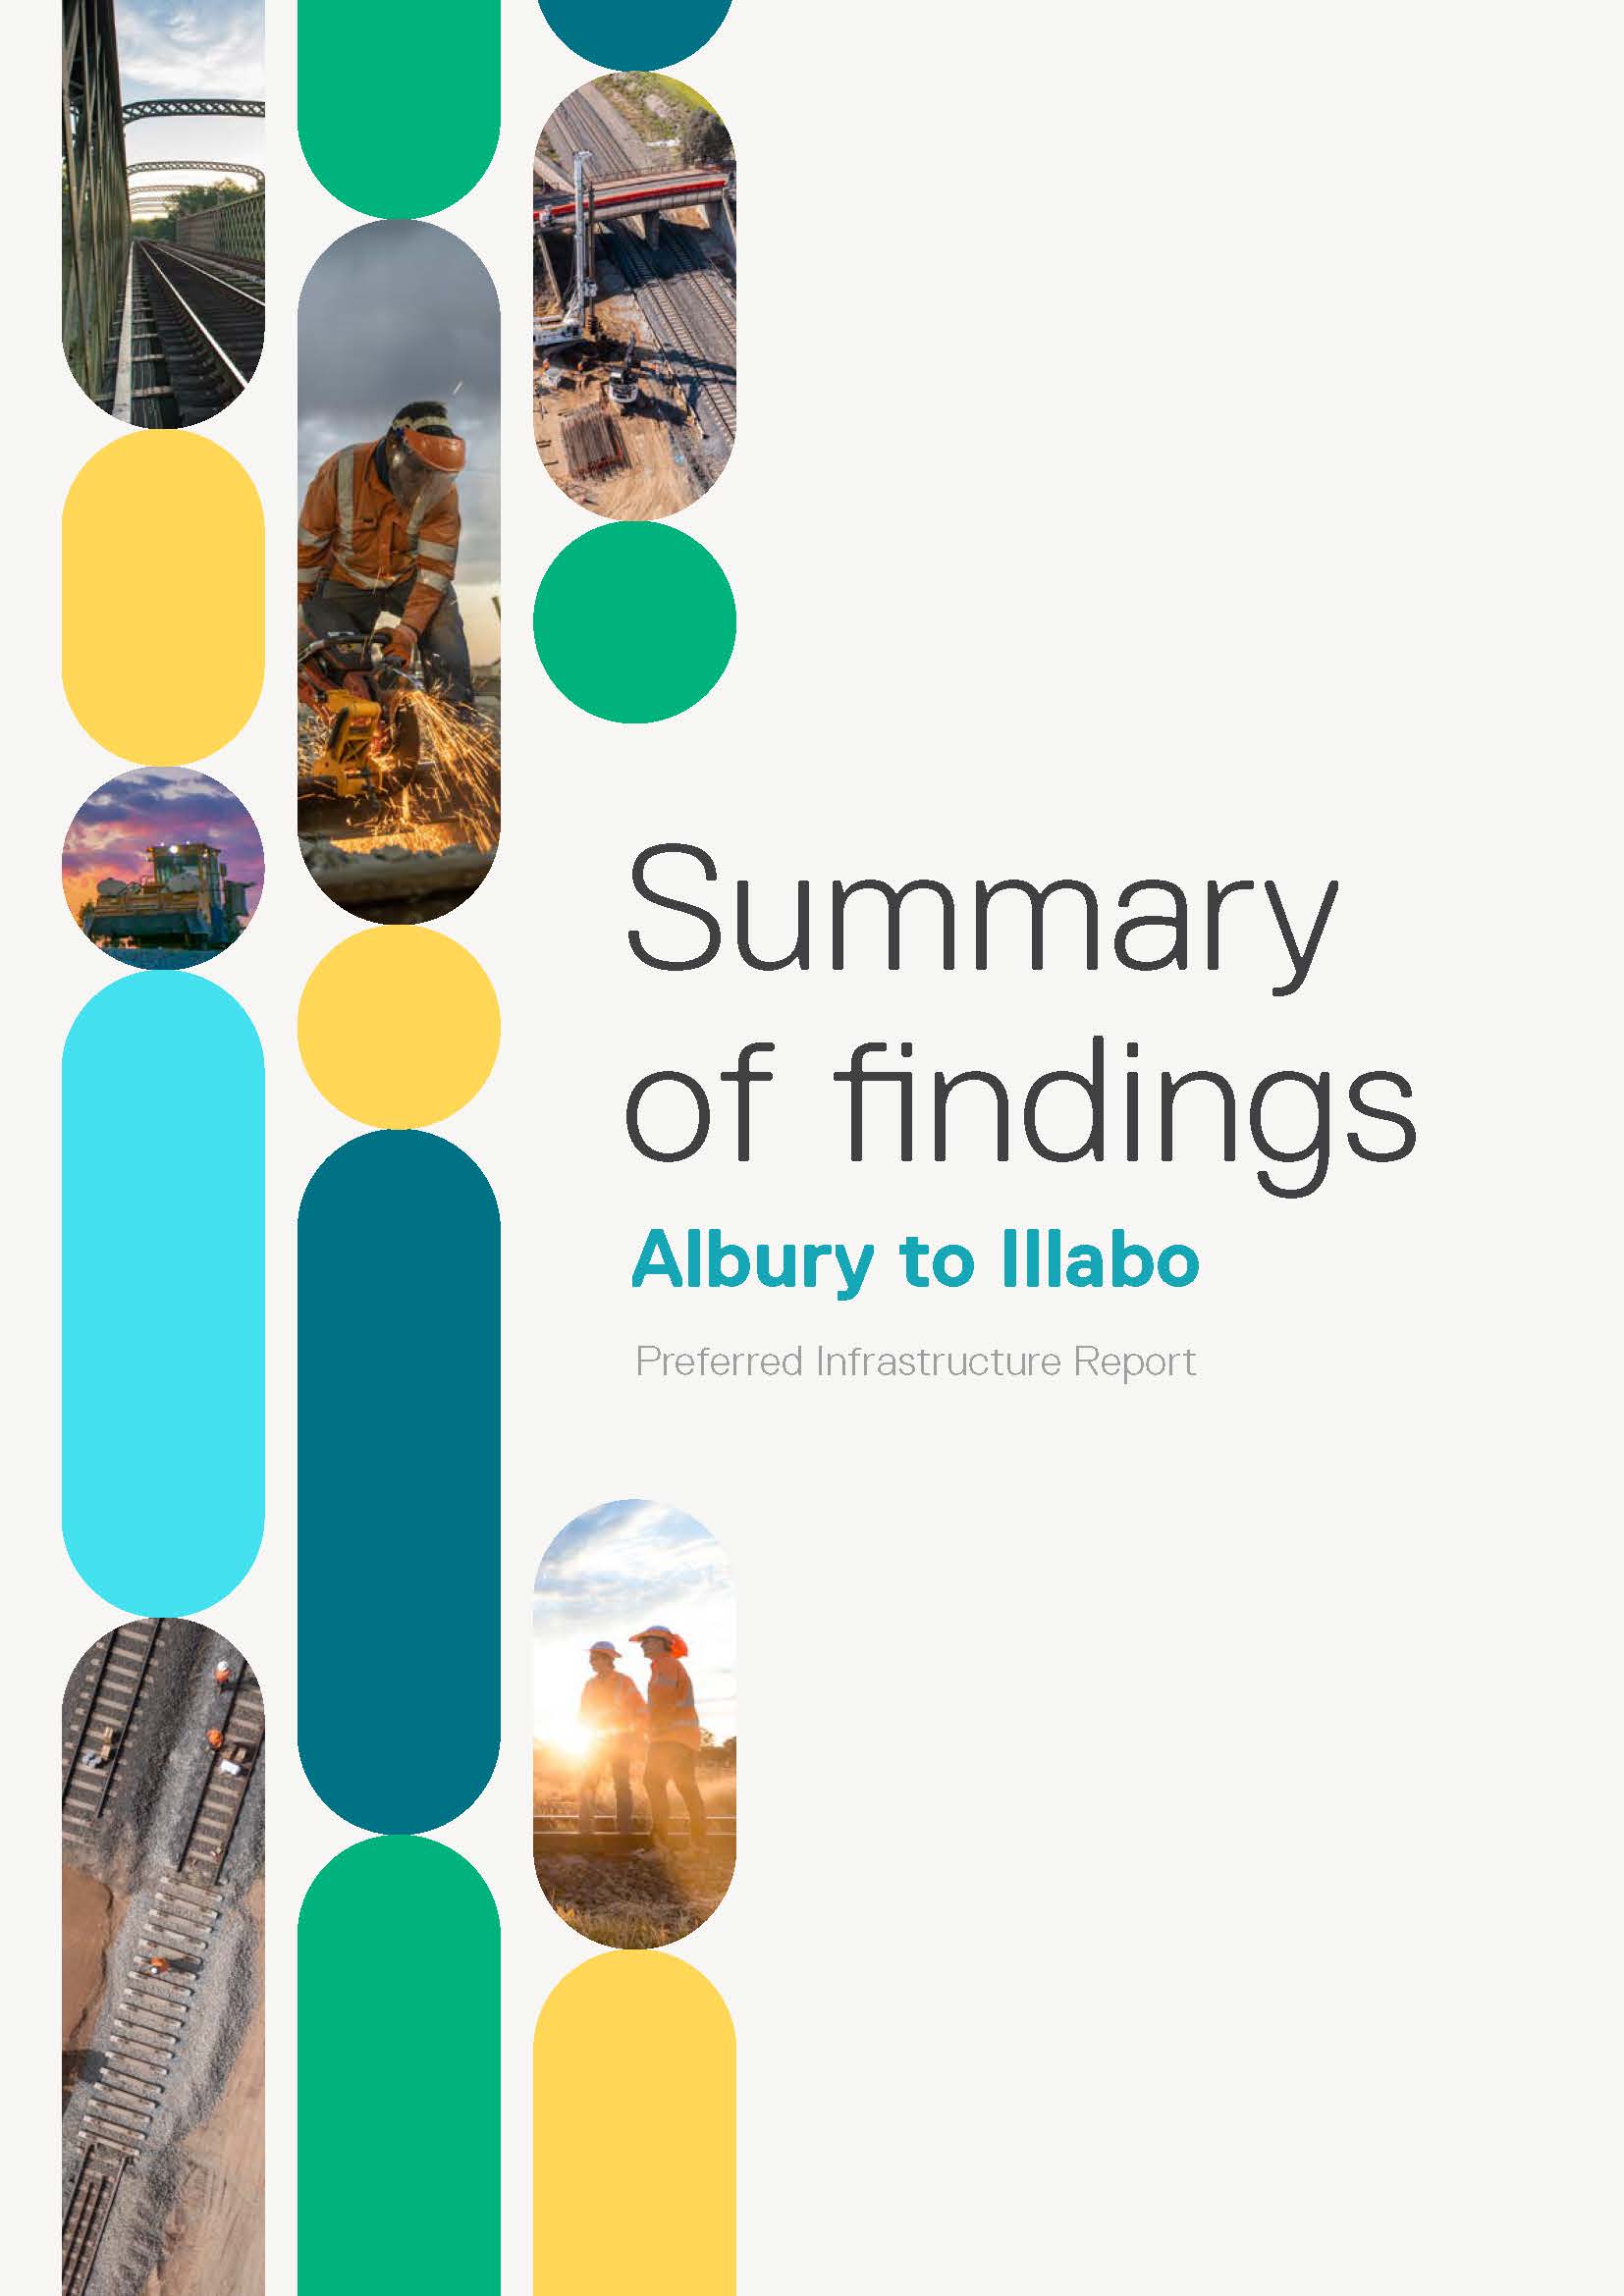 Image thumbnail for Albury to Illabo PIR Summary of Findings